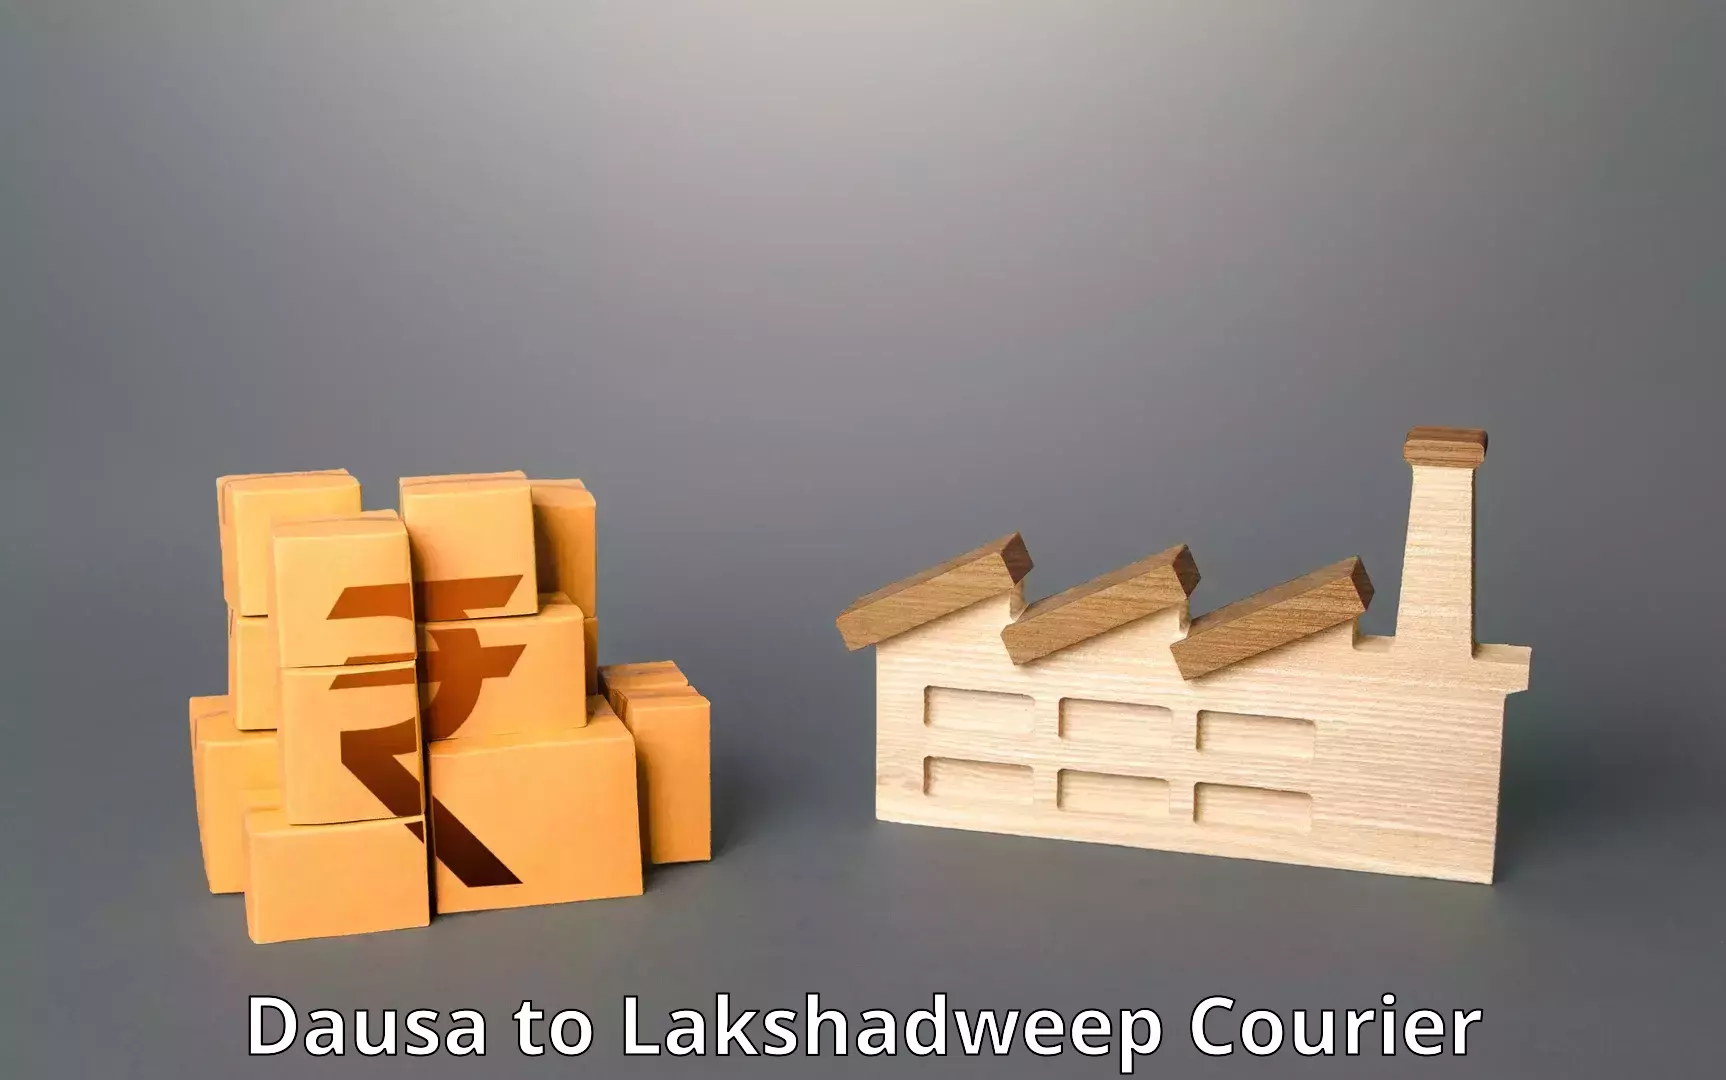 Package delivery network Dausa to Lakshadweep